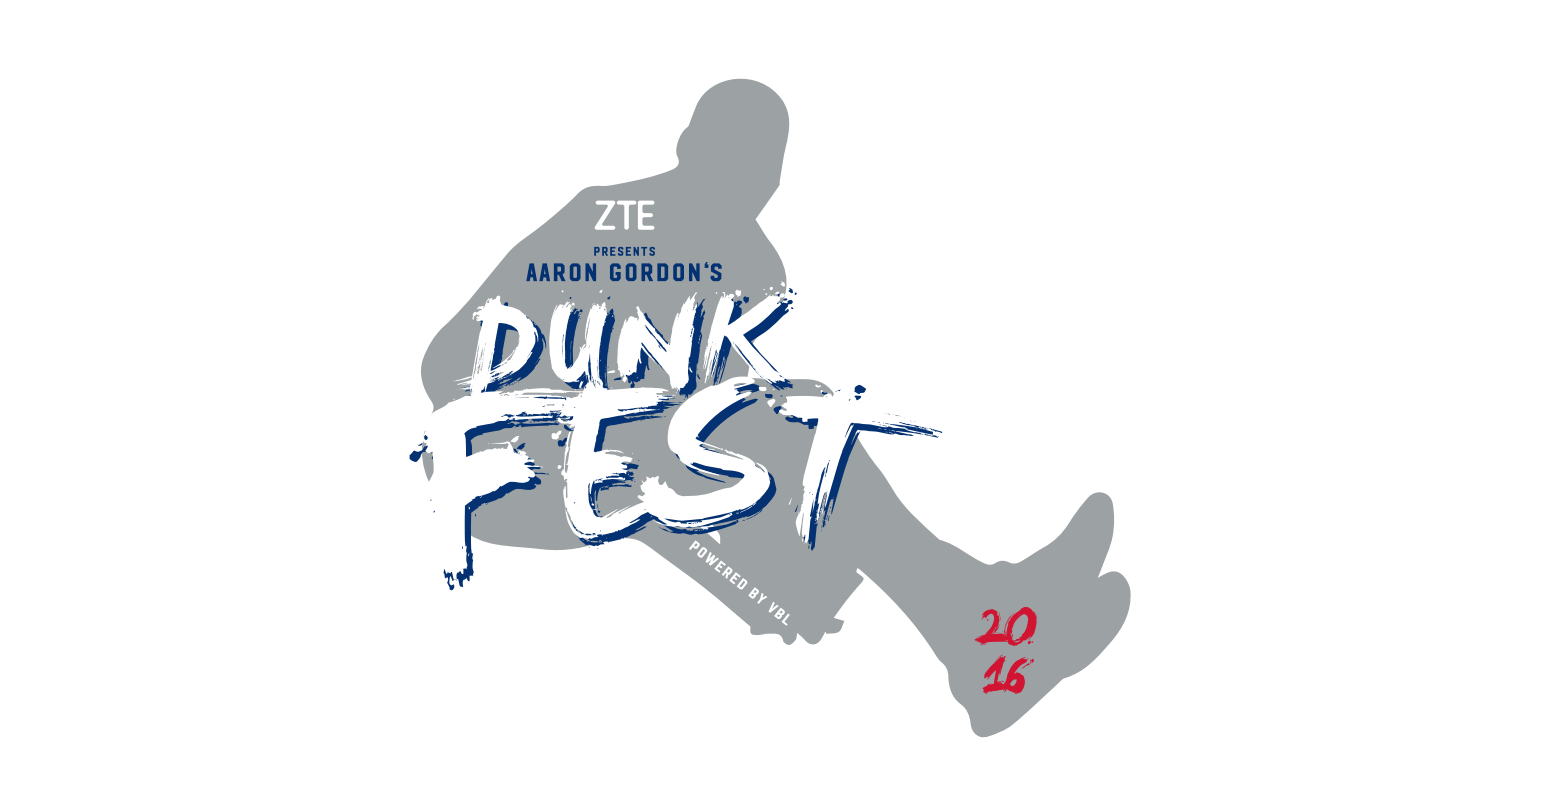 Aaron Gordon and ZTE presents the AG Dunk Fest – LINEUP